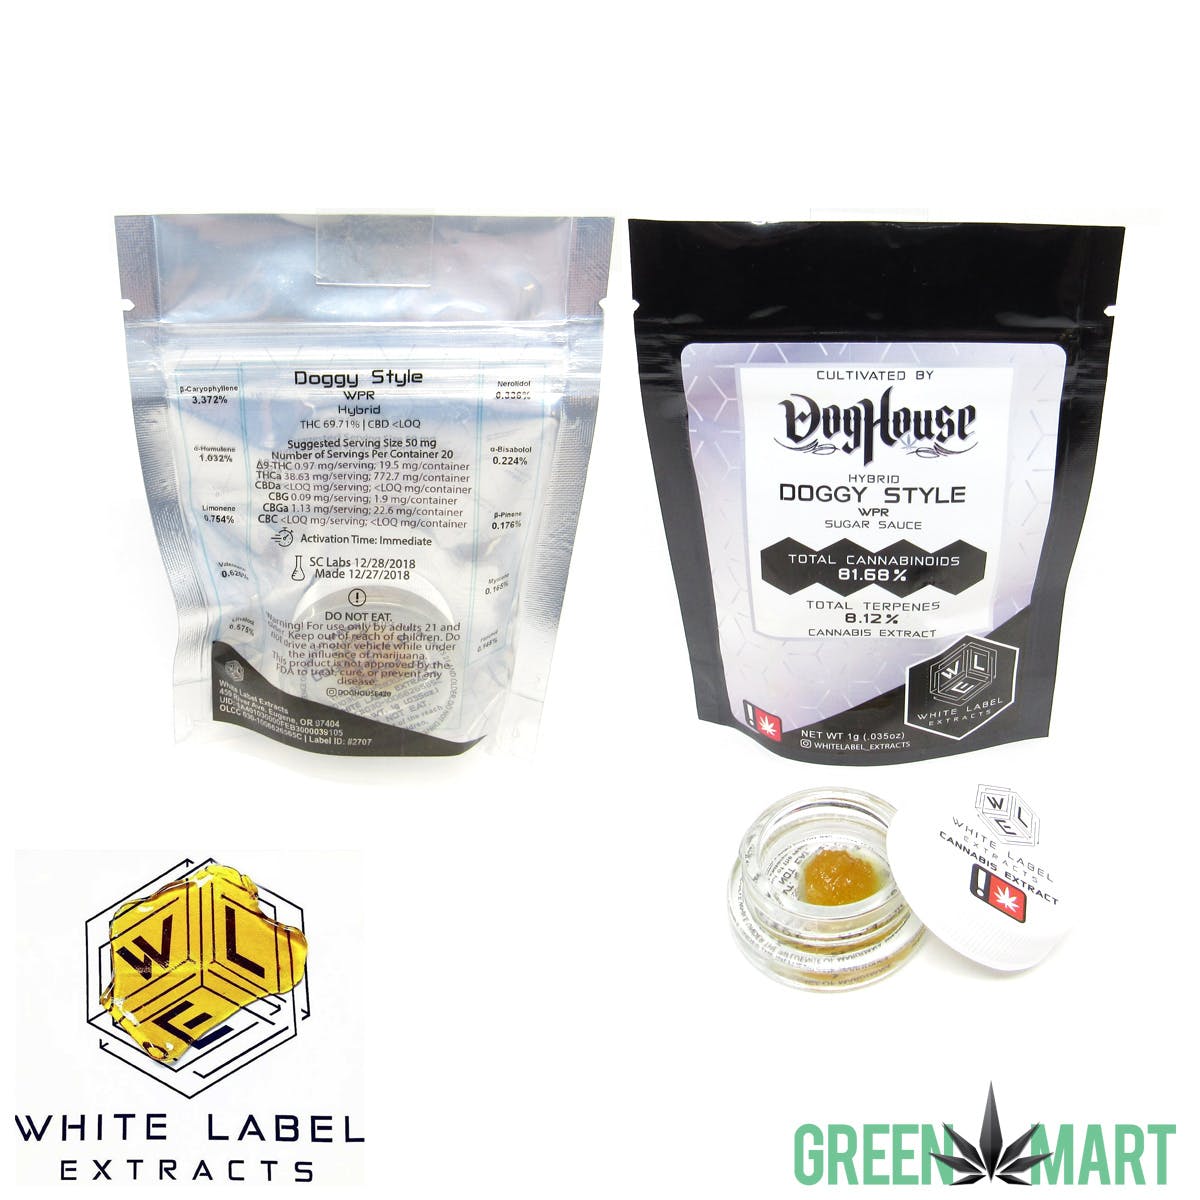 White Label Extracts - Doggy Style Sugar Sauce